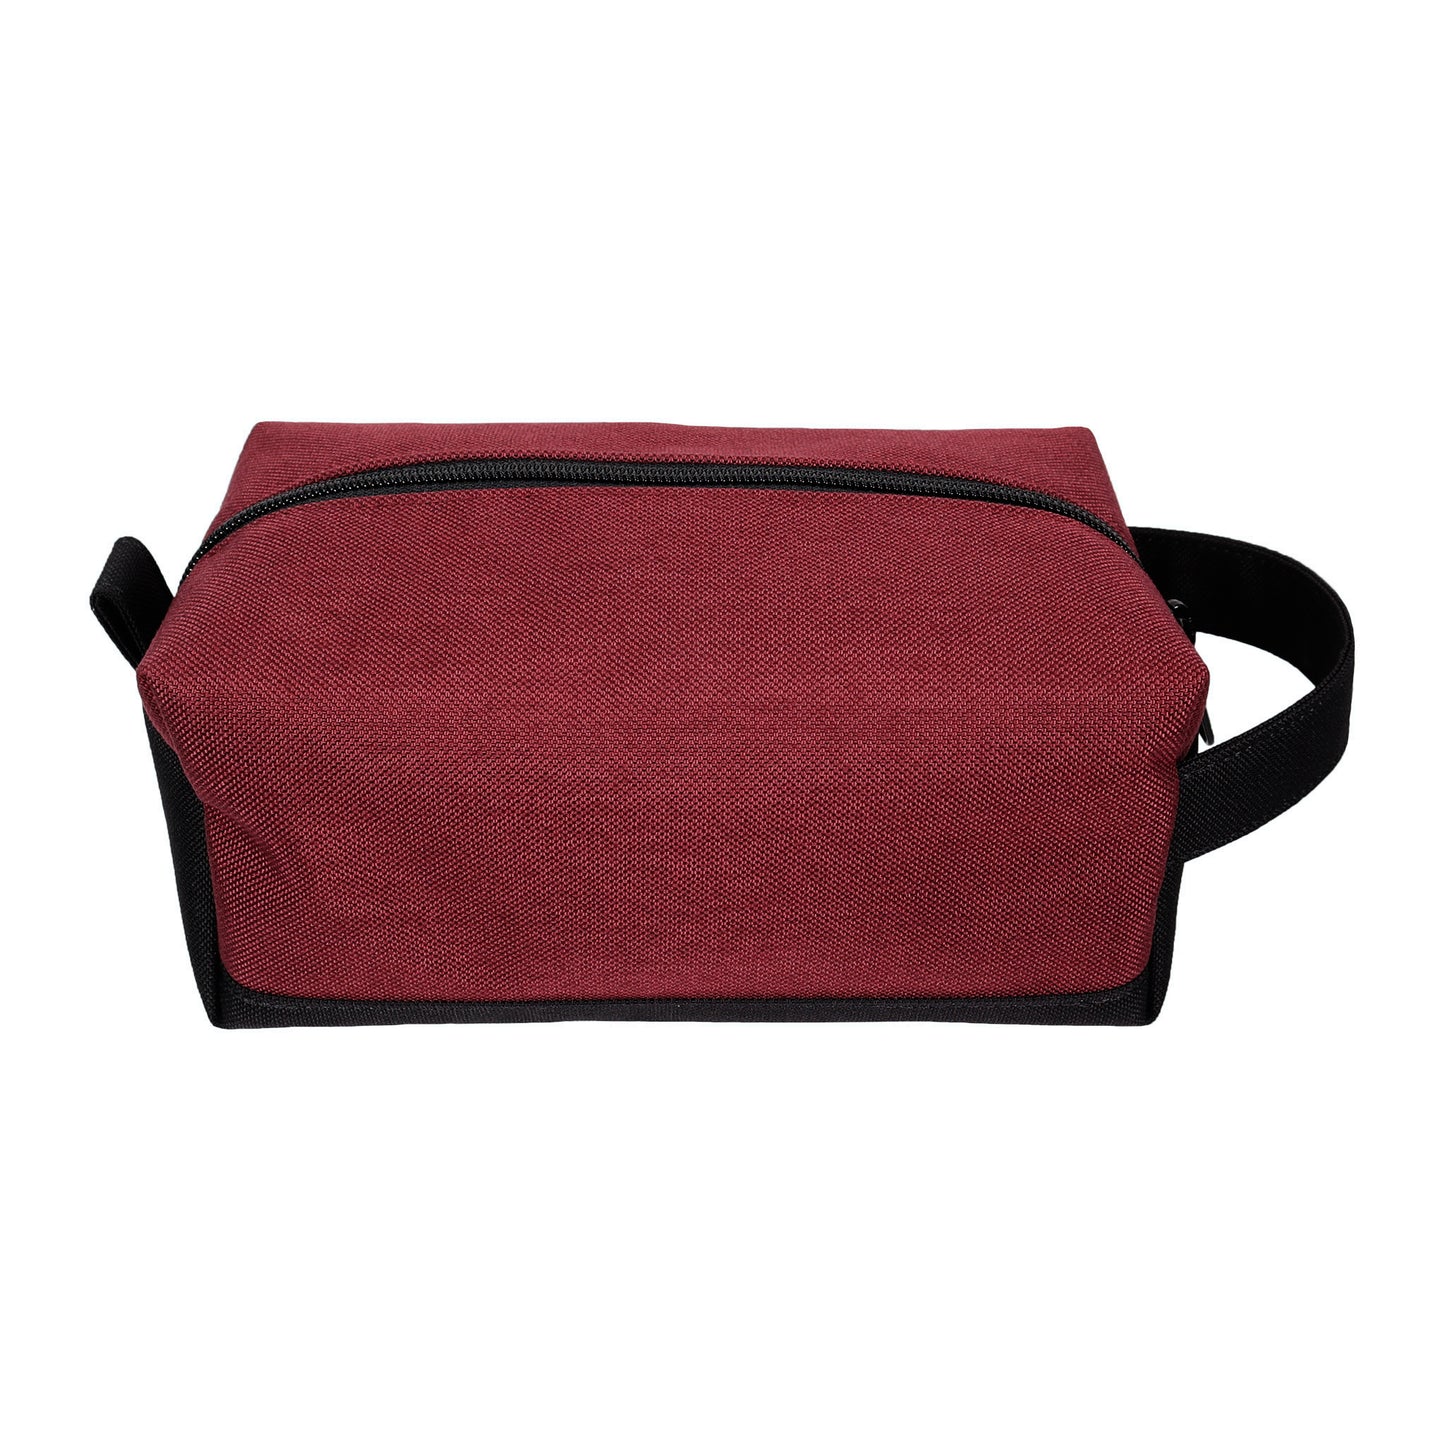 Red and Black Canvas Toiletry Bag